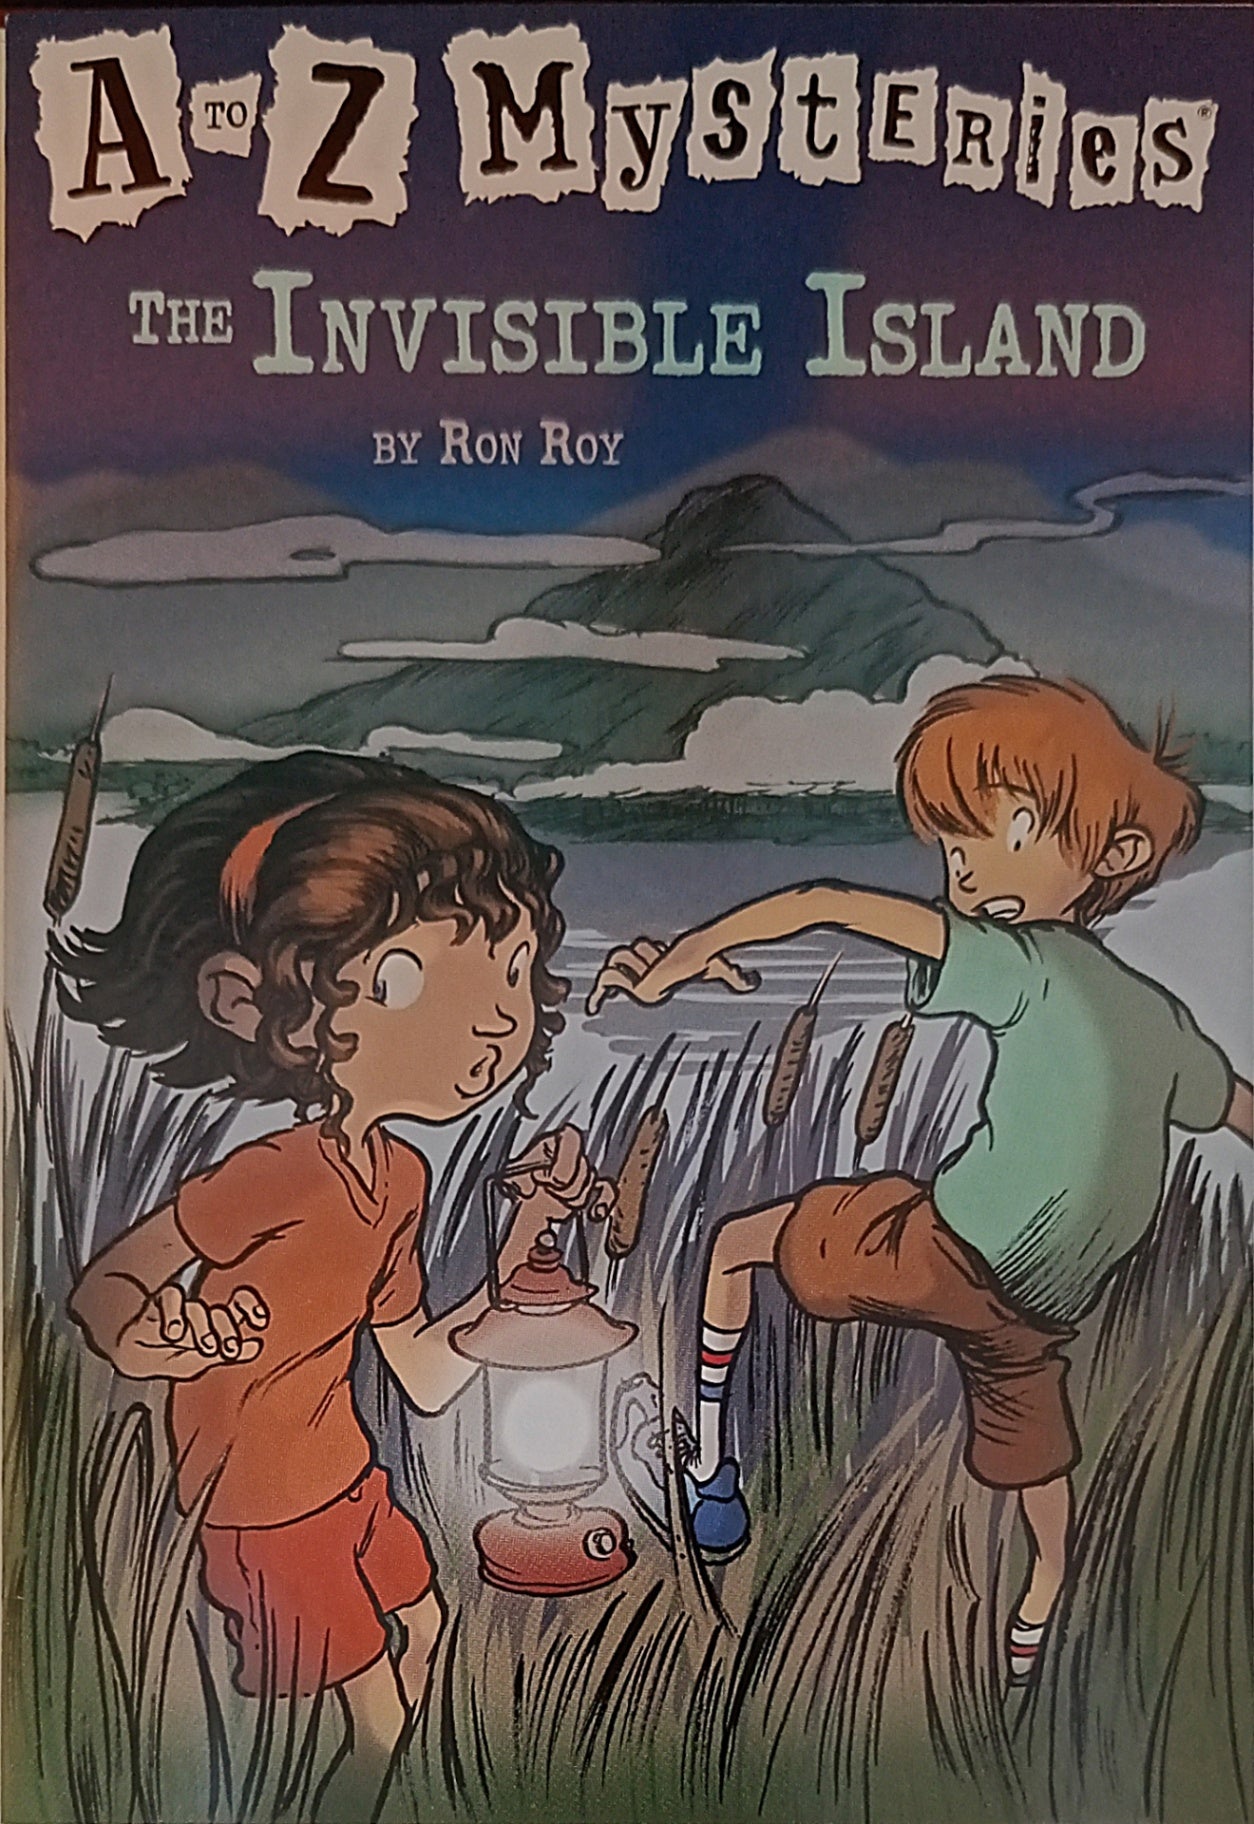 A to Z Mysteries The Invisible Island